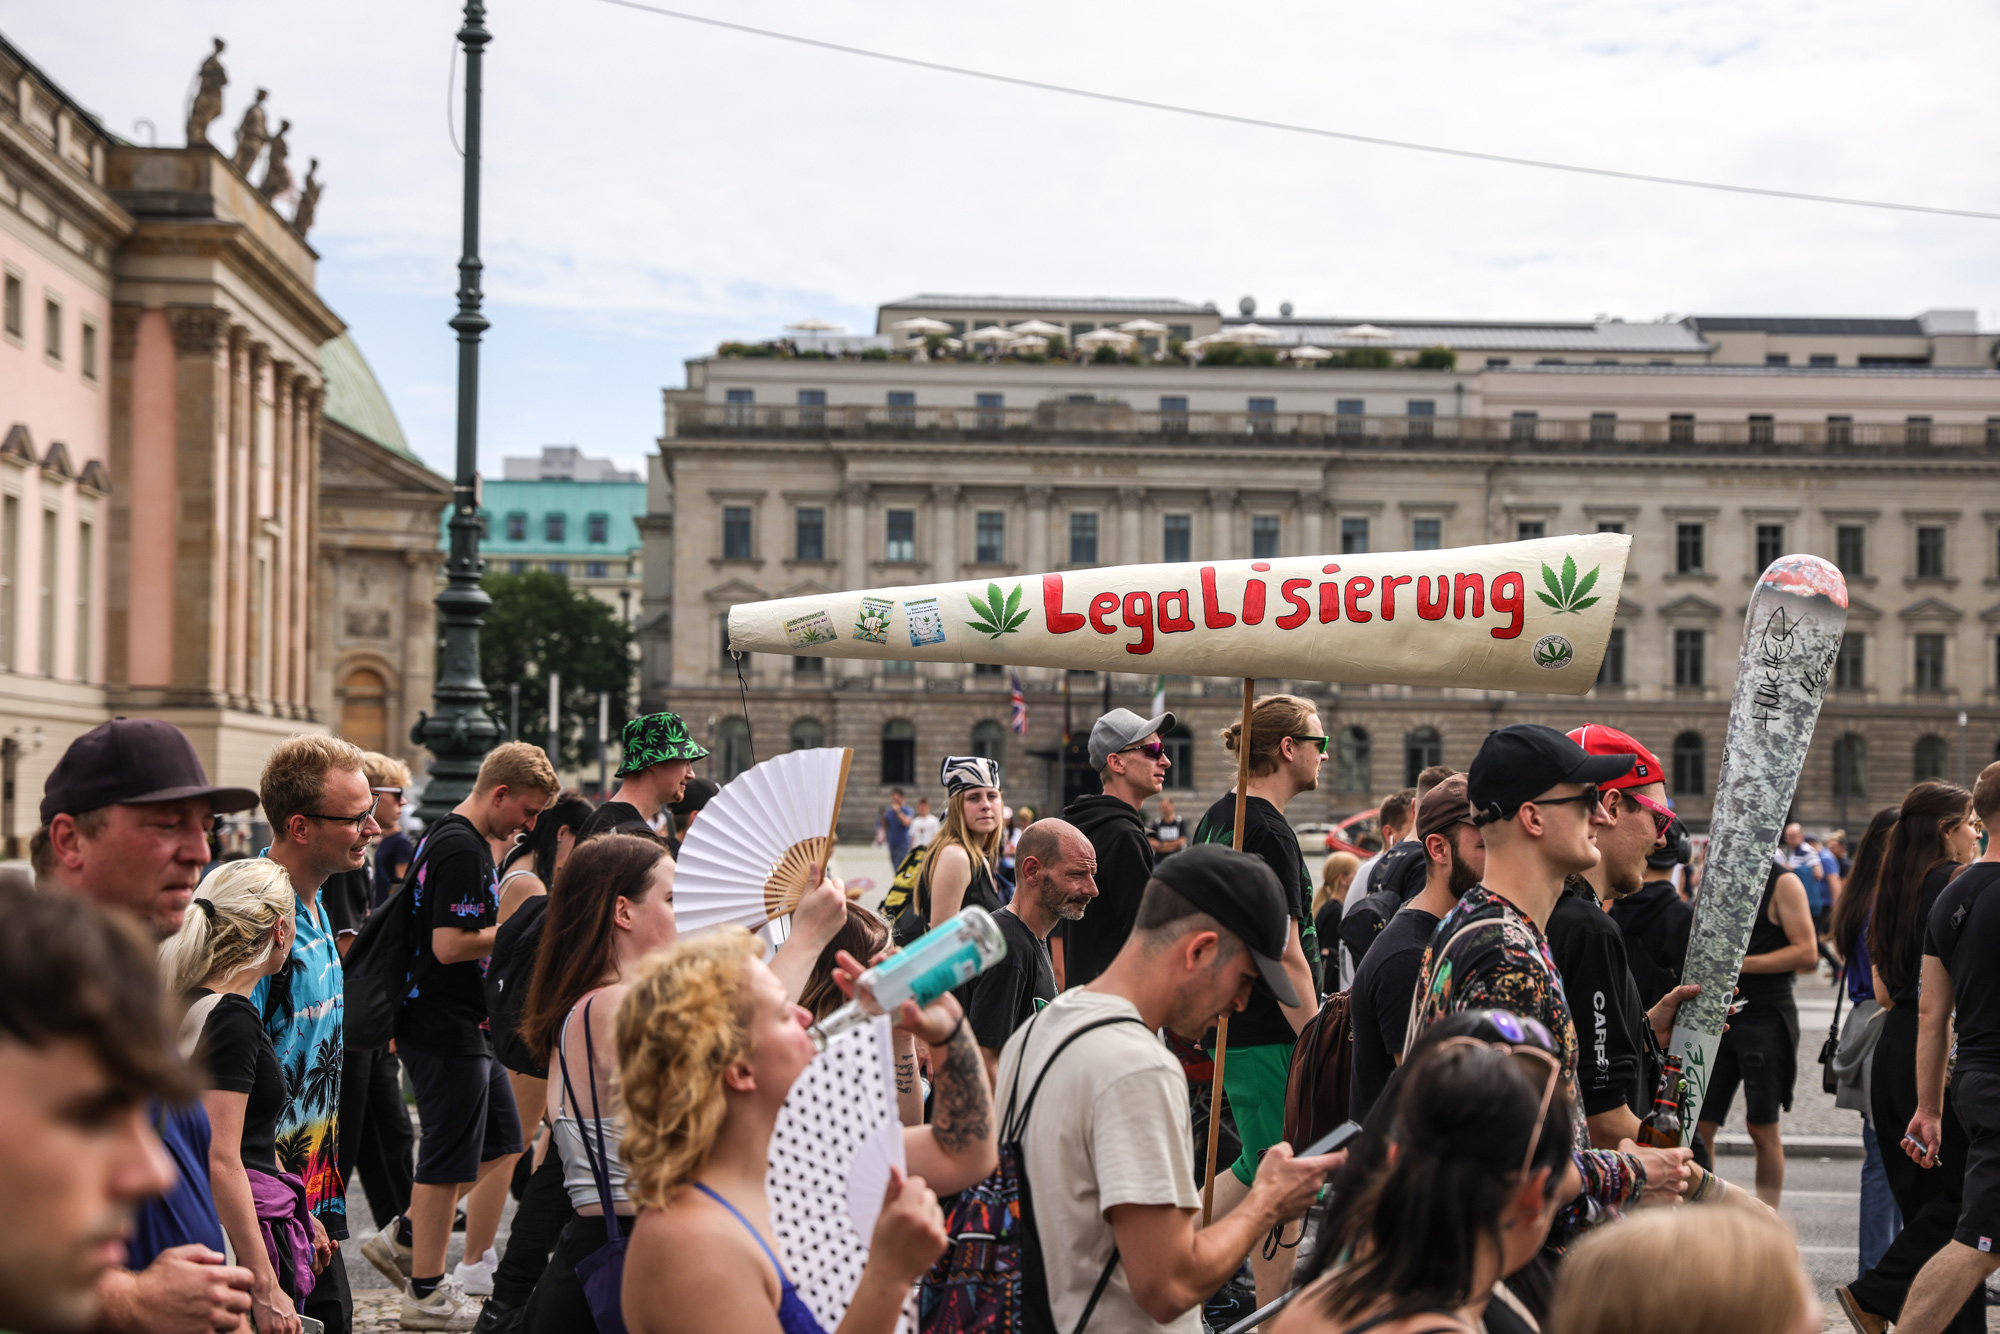 Celebrations Break Out All Over Germany, as “1st April” Marks Cannabis Being Legalised in The Country!